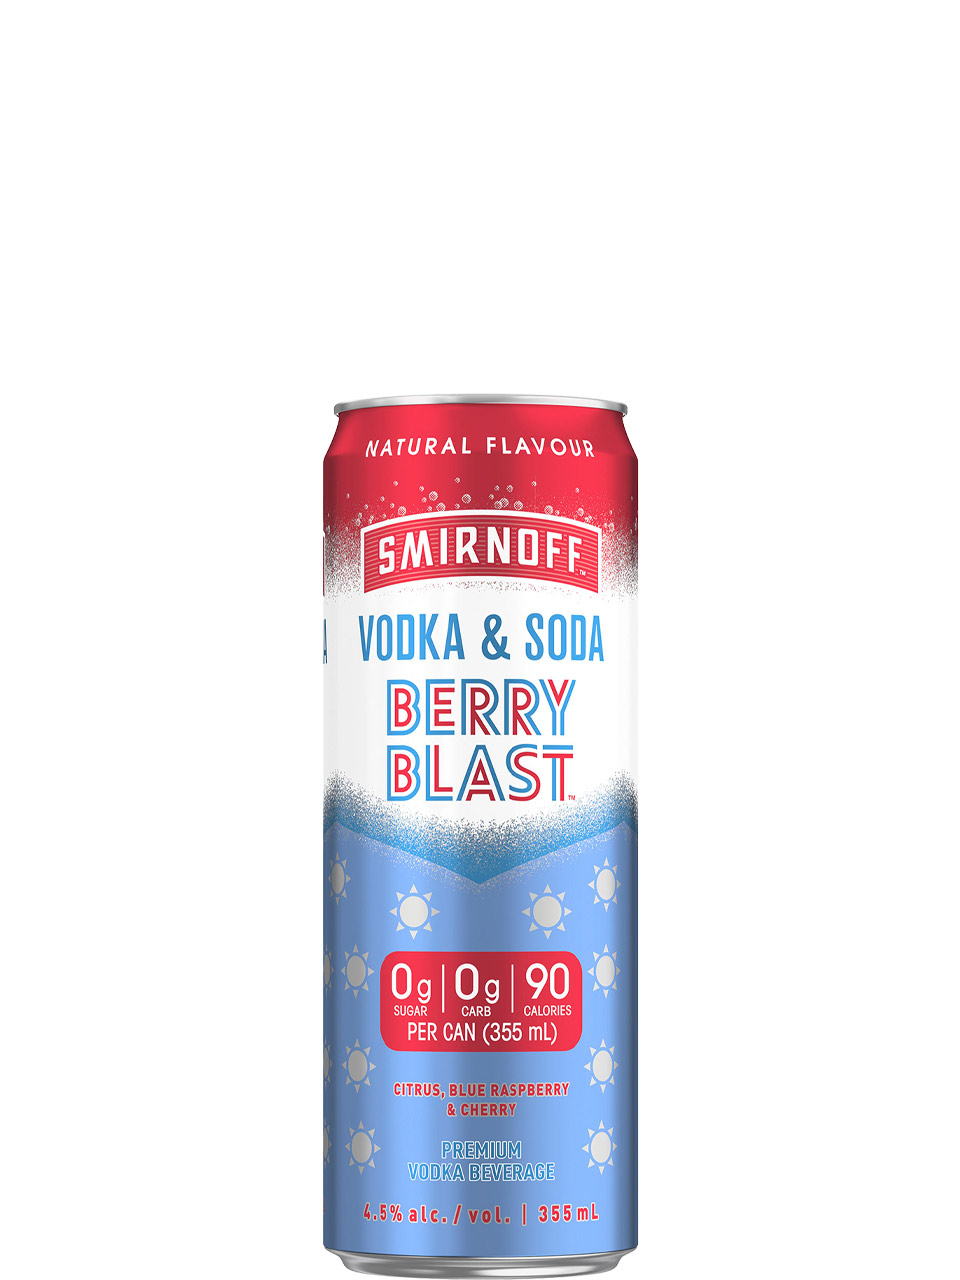 Smirnoff Vodka and Soda Berry Blast 6 Pack Cans